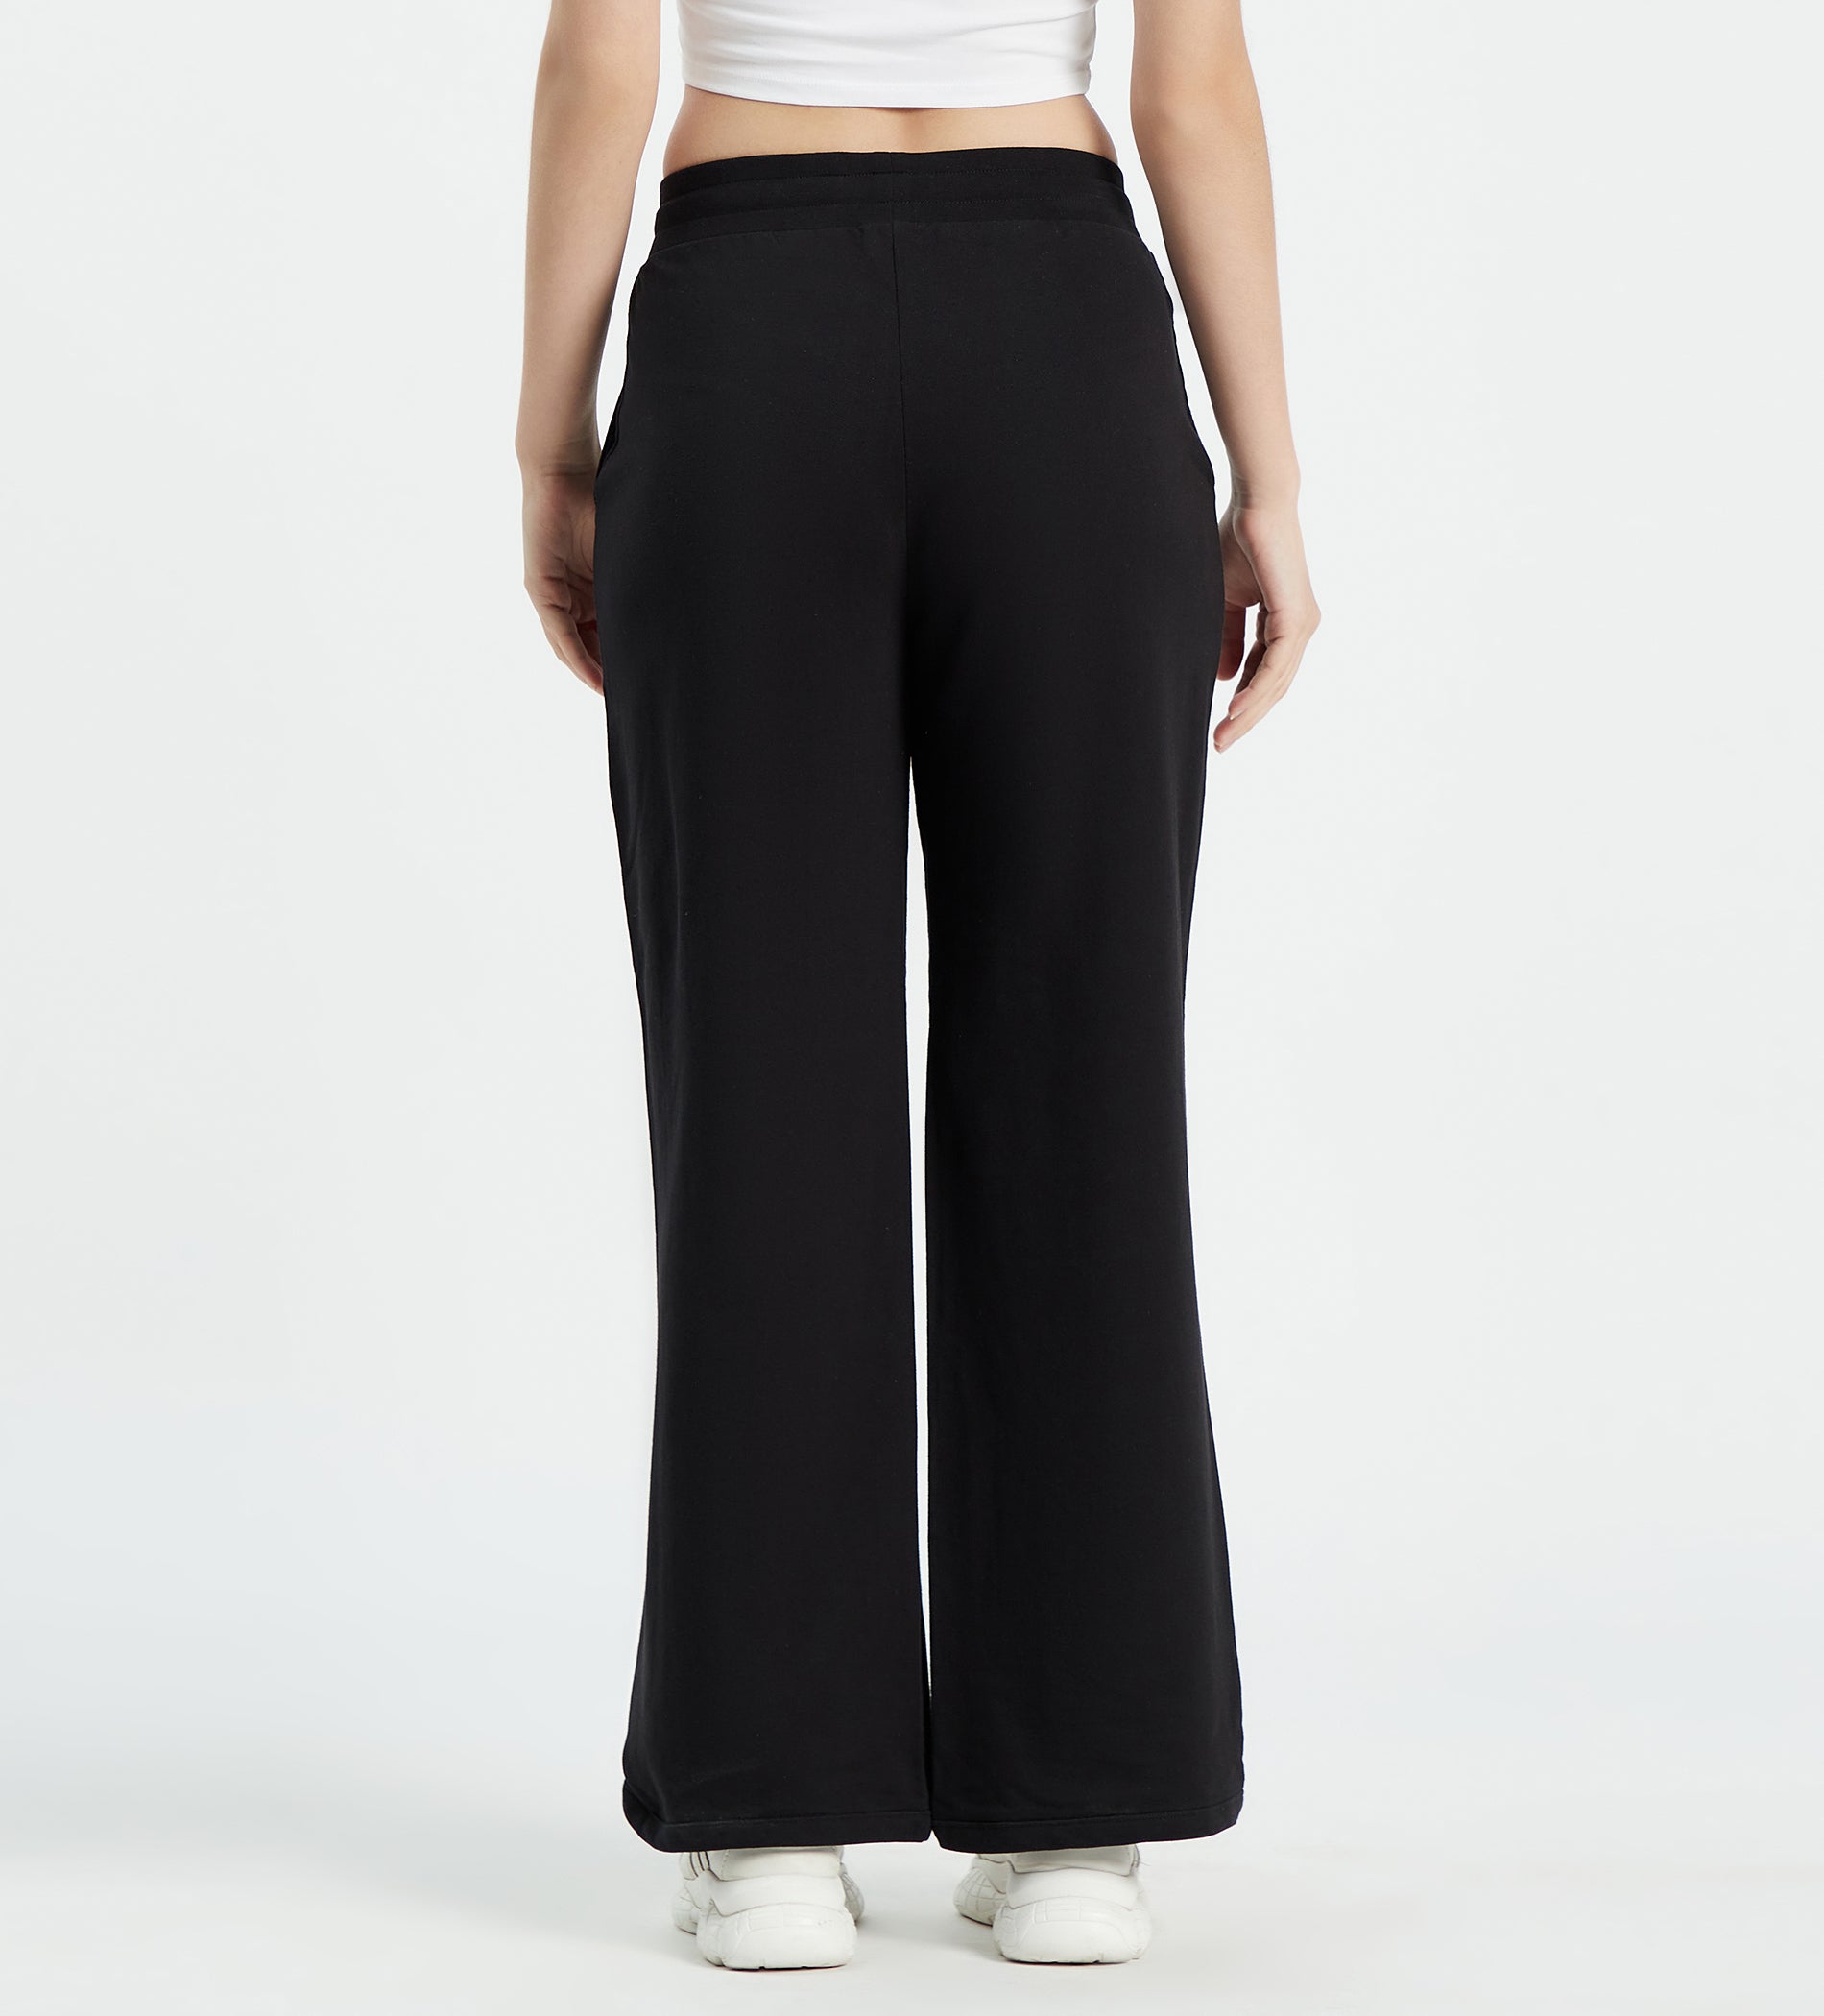 Women Black Trackpant With Ripped Spaces